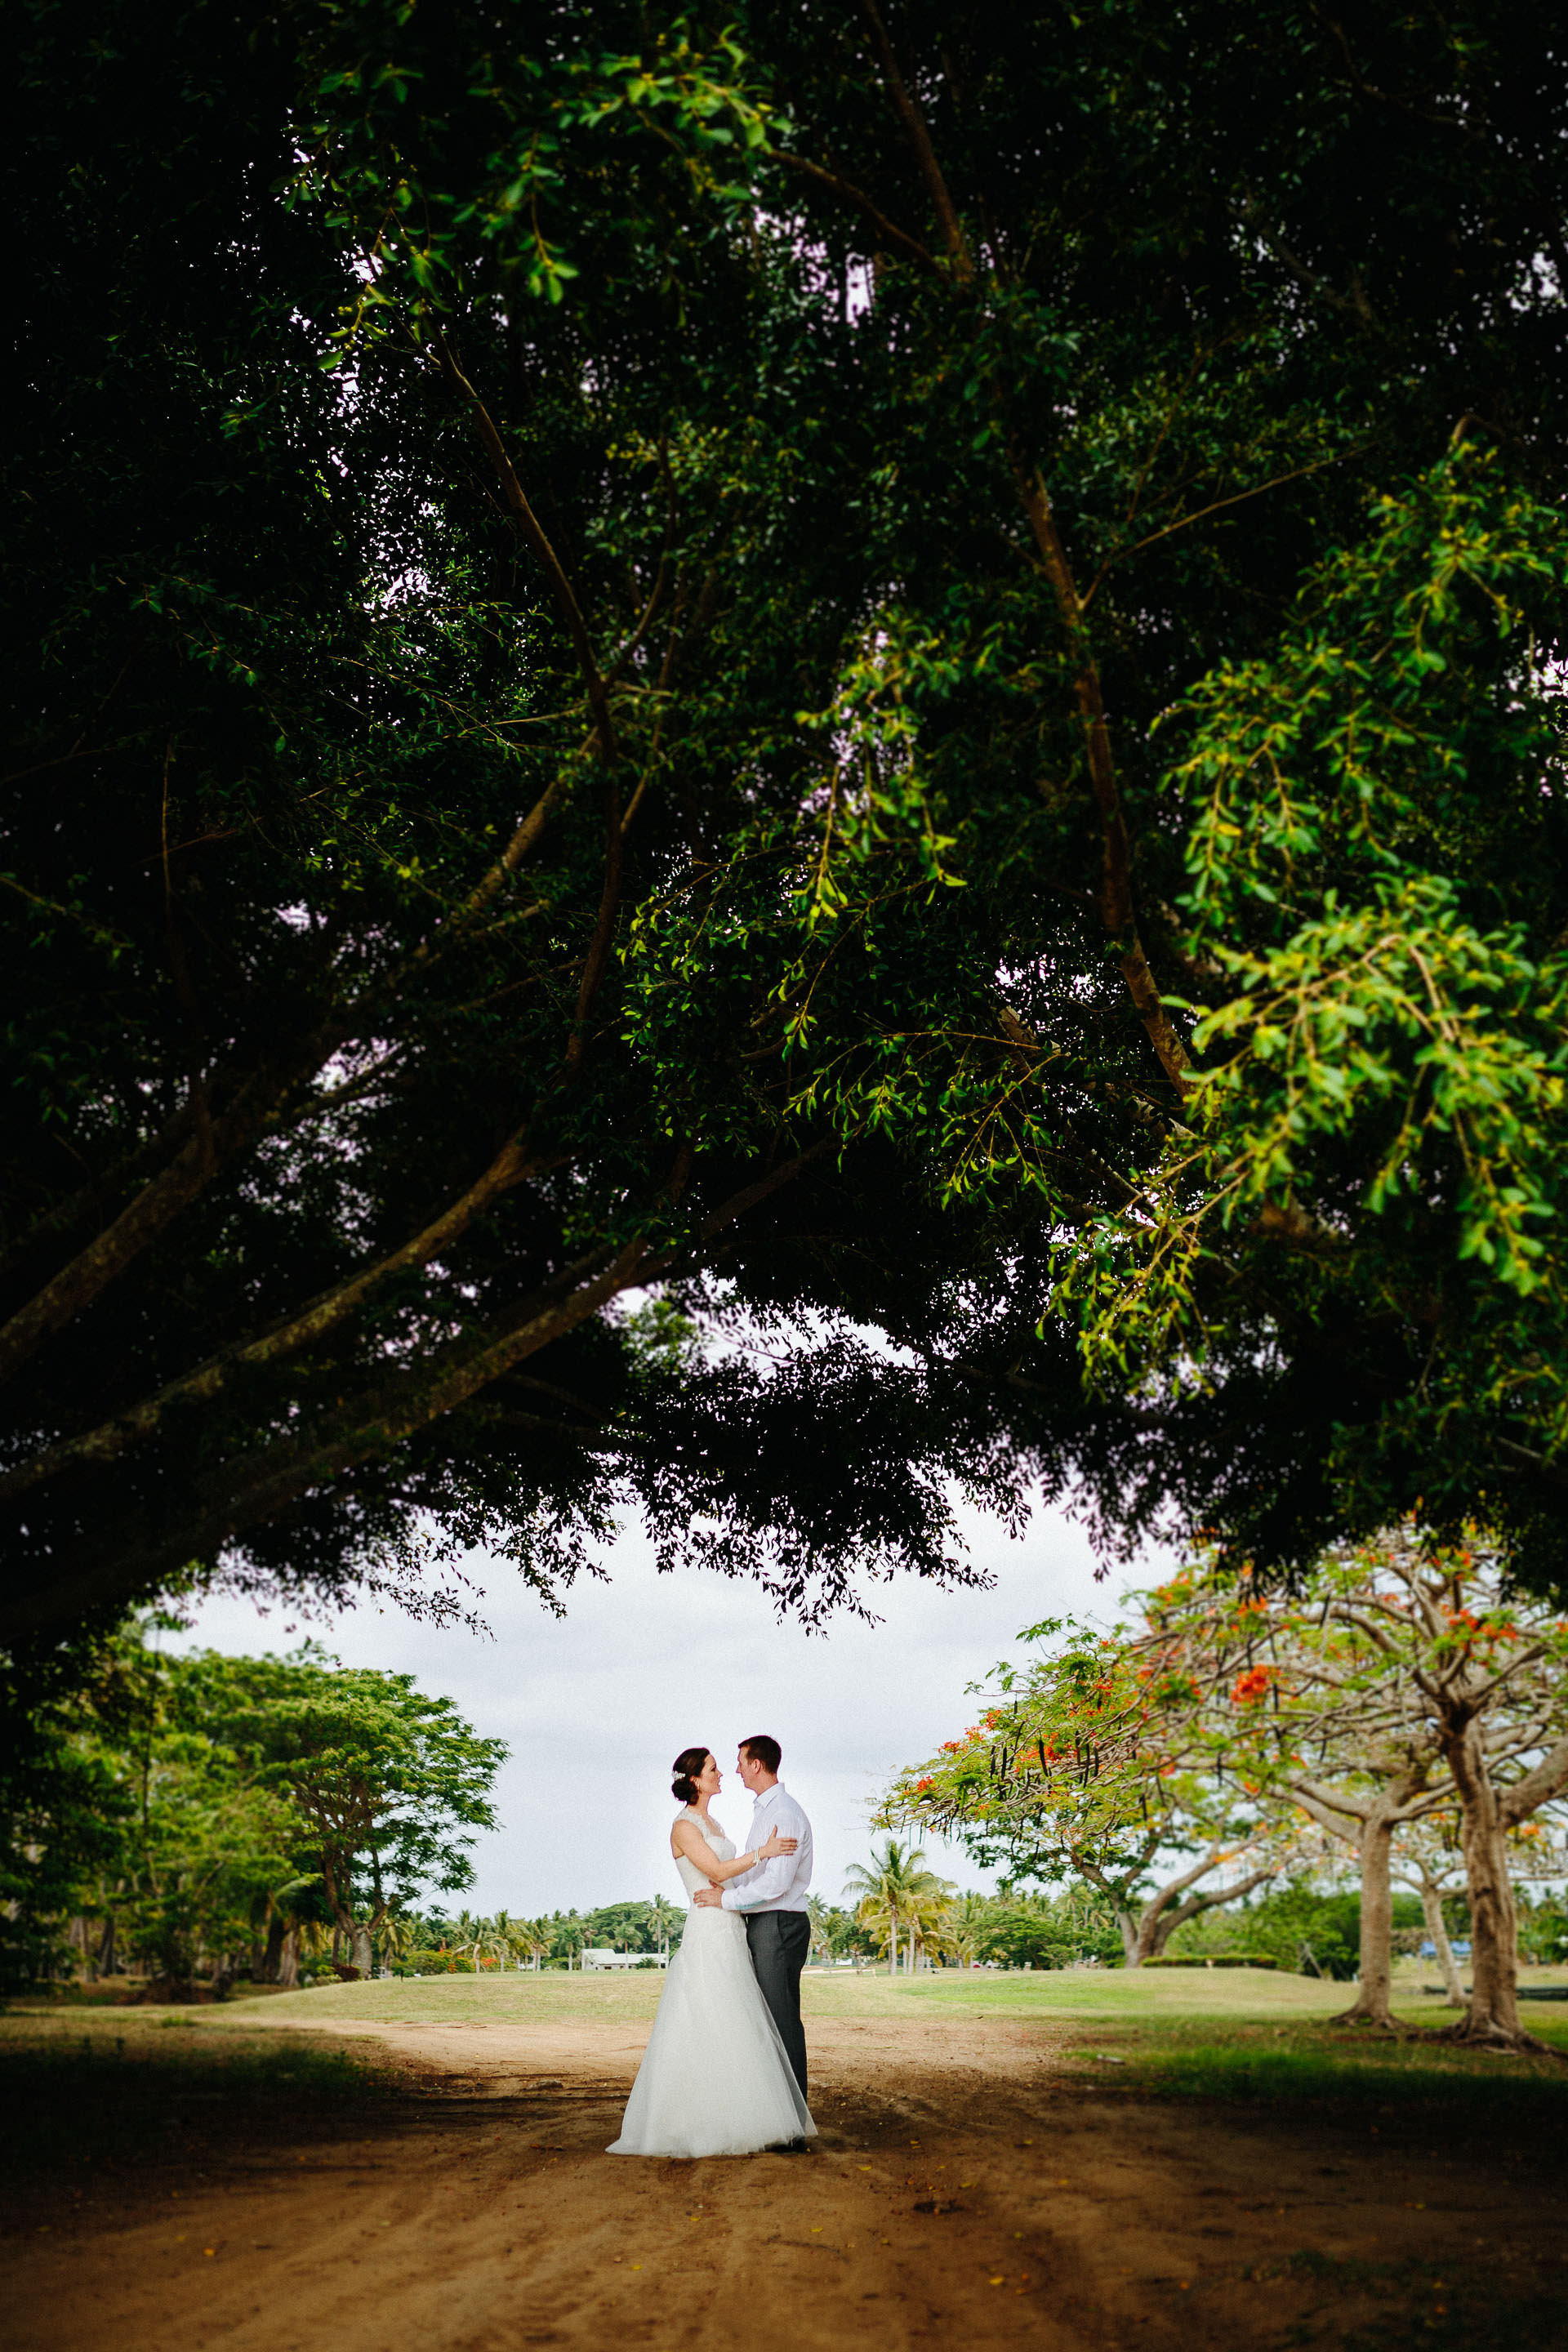 The bride and groom pose for a photo under two large trees